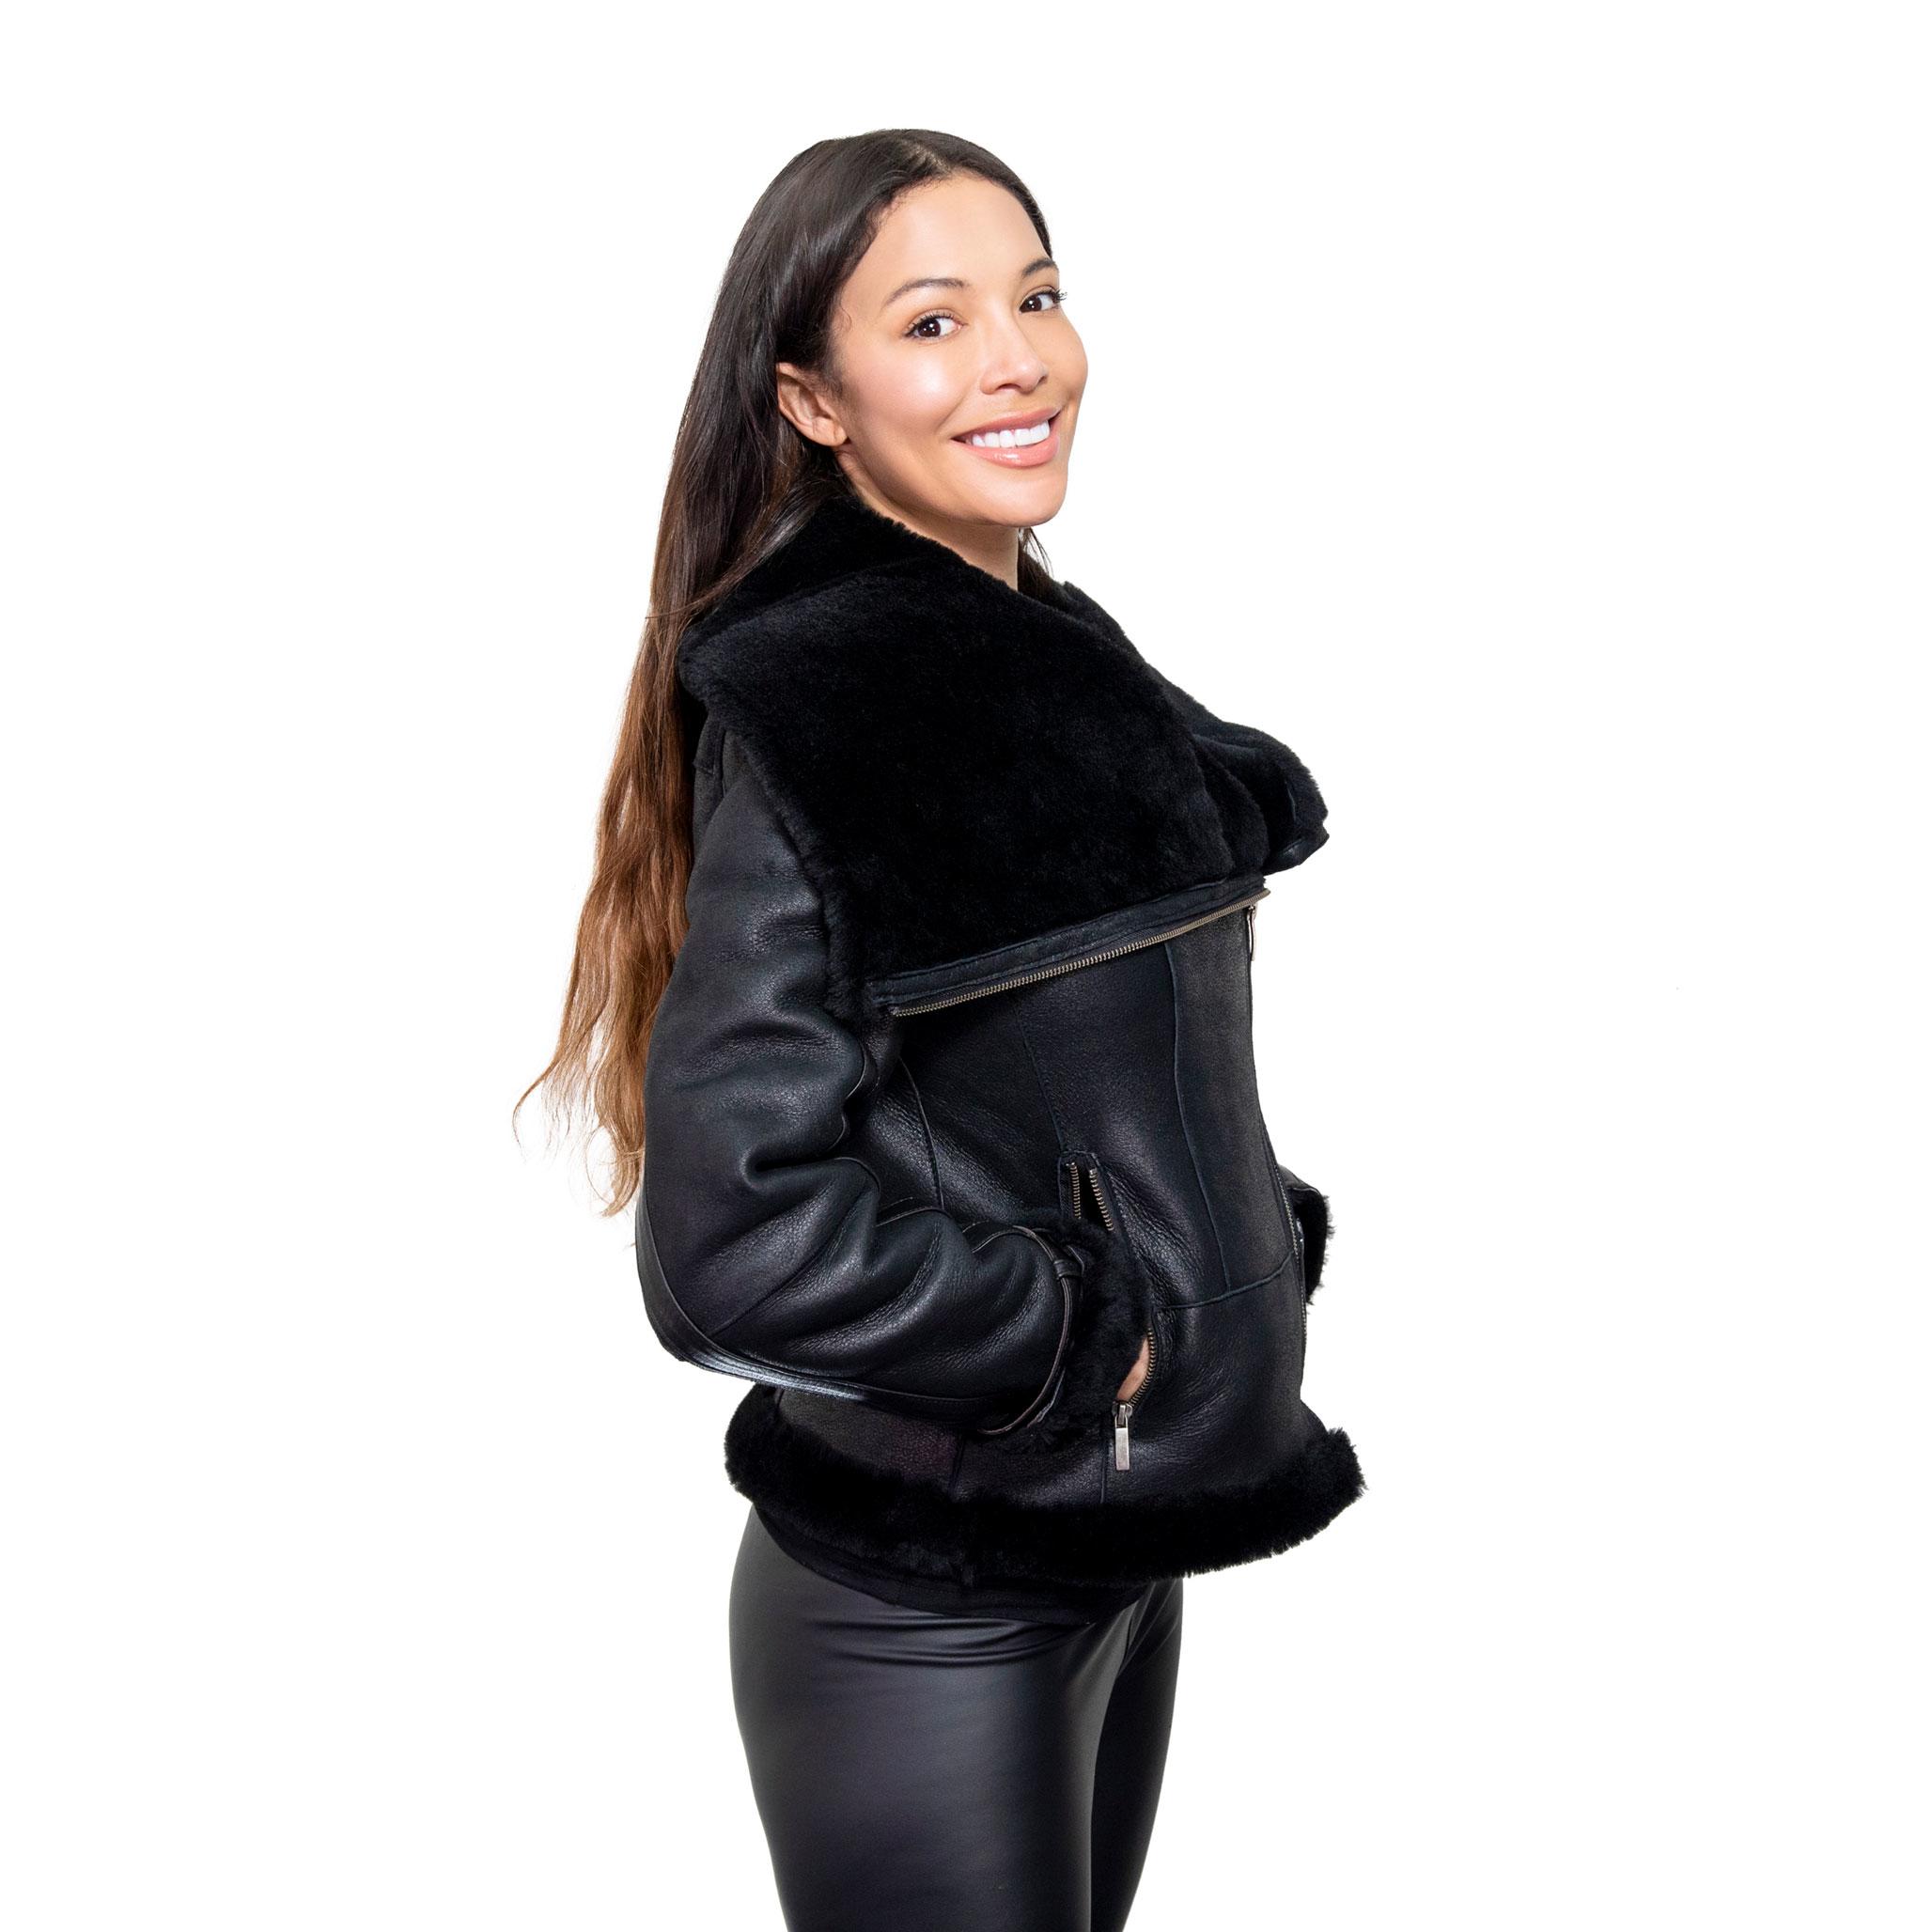 A models stands to the right side, smiling blissfully as she dons a beautiful black sheepskin jacket, with an elegant, large fur lined collar. The outer layer of jacket is in a sleek nappa leather finish, with lush interior sheepskin fur.